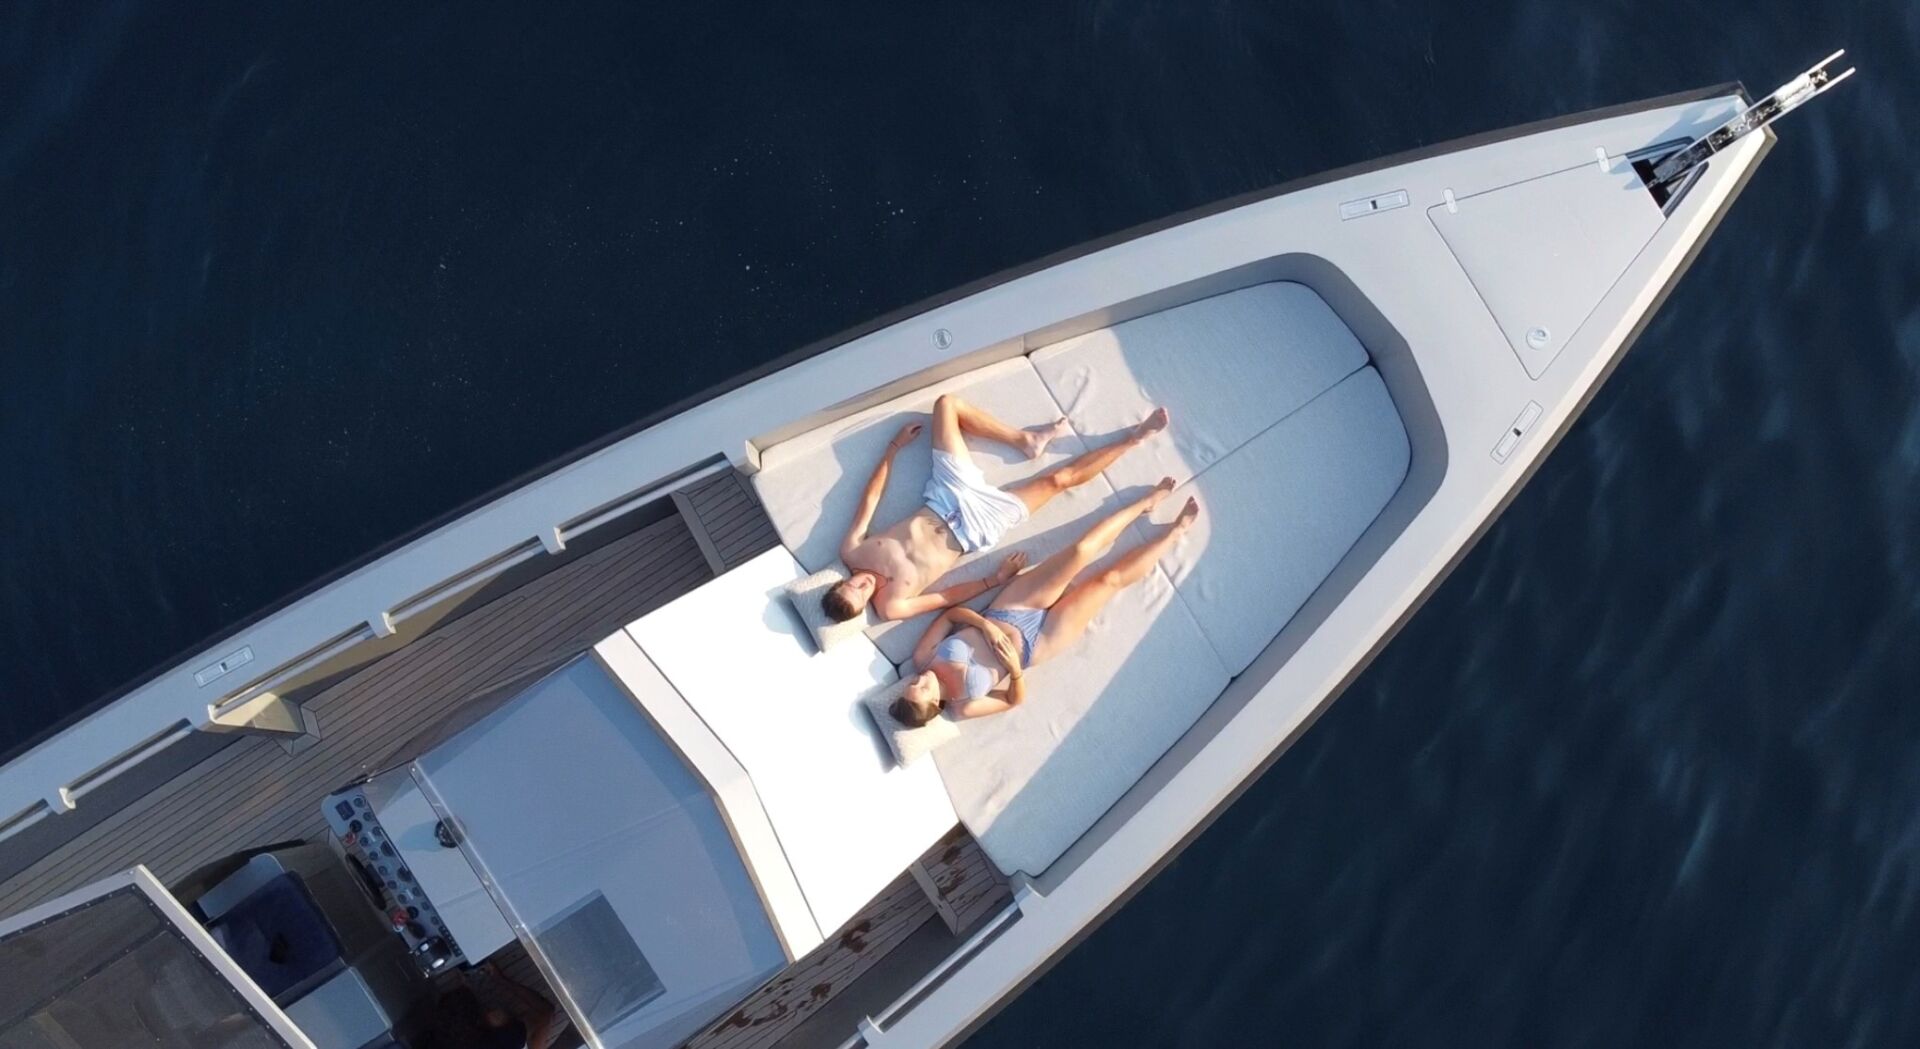 Luxury Wally 45 Tender, EMVYA, Now Available for Sale in Beaulieu-sur-Mer at €485,000